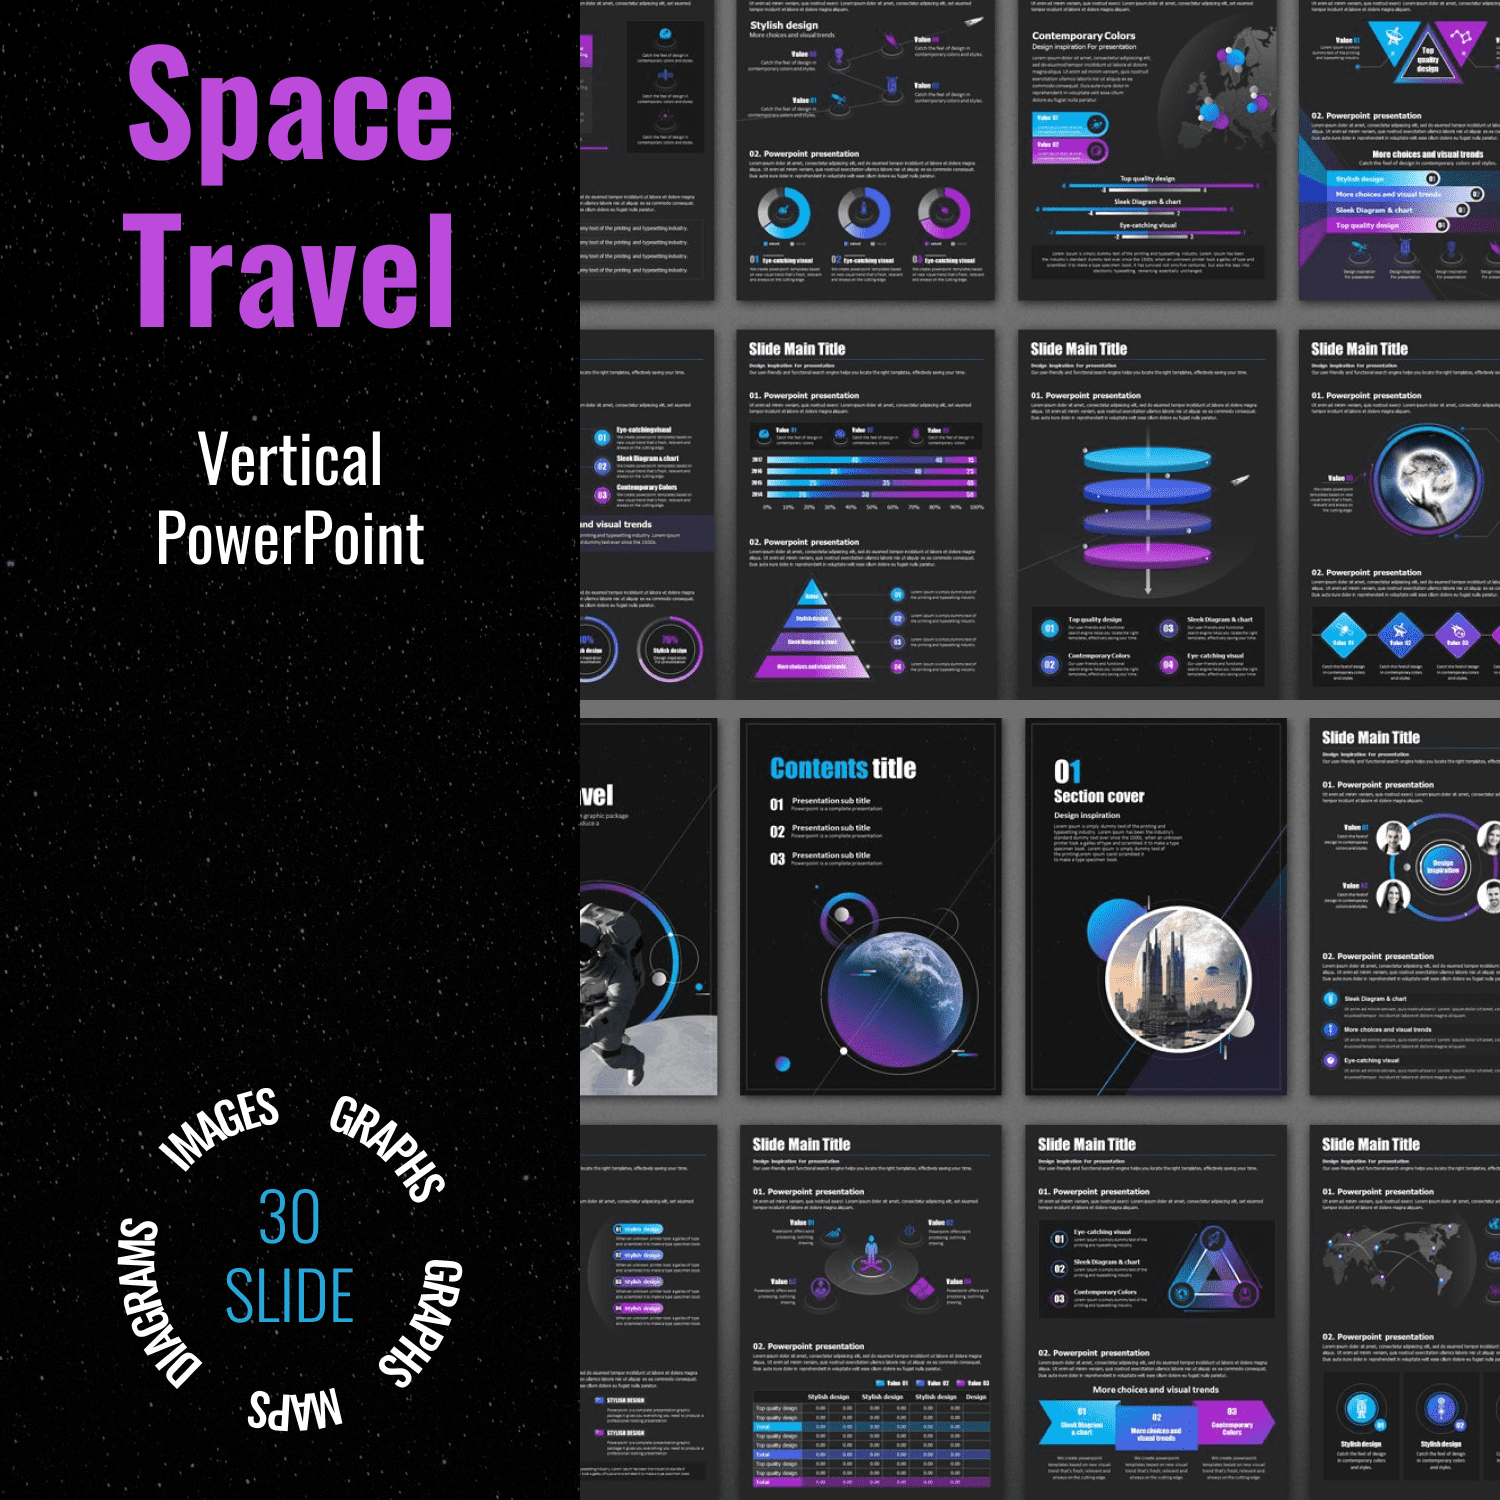 space travel vertical powerpoint cover image.